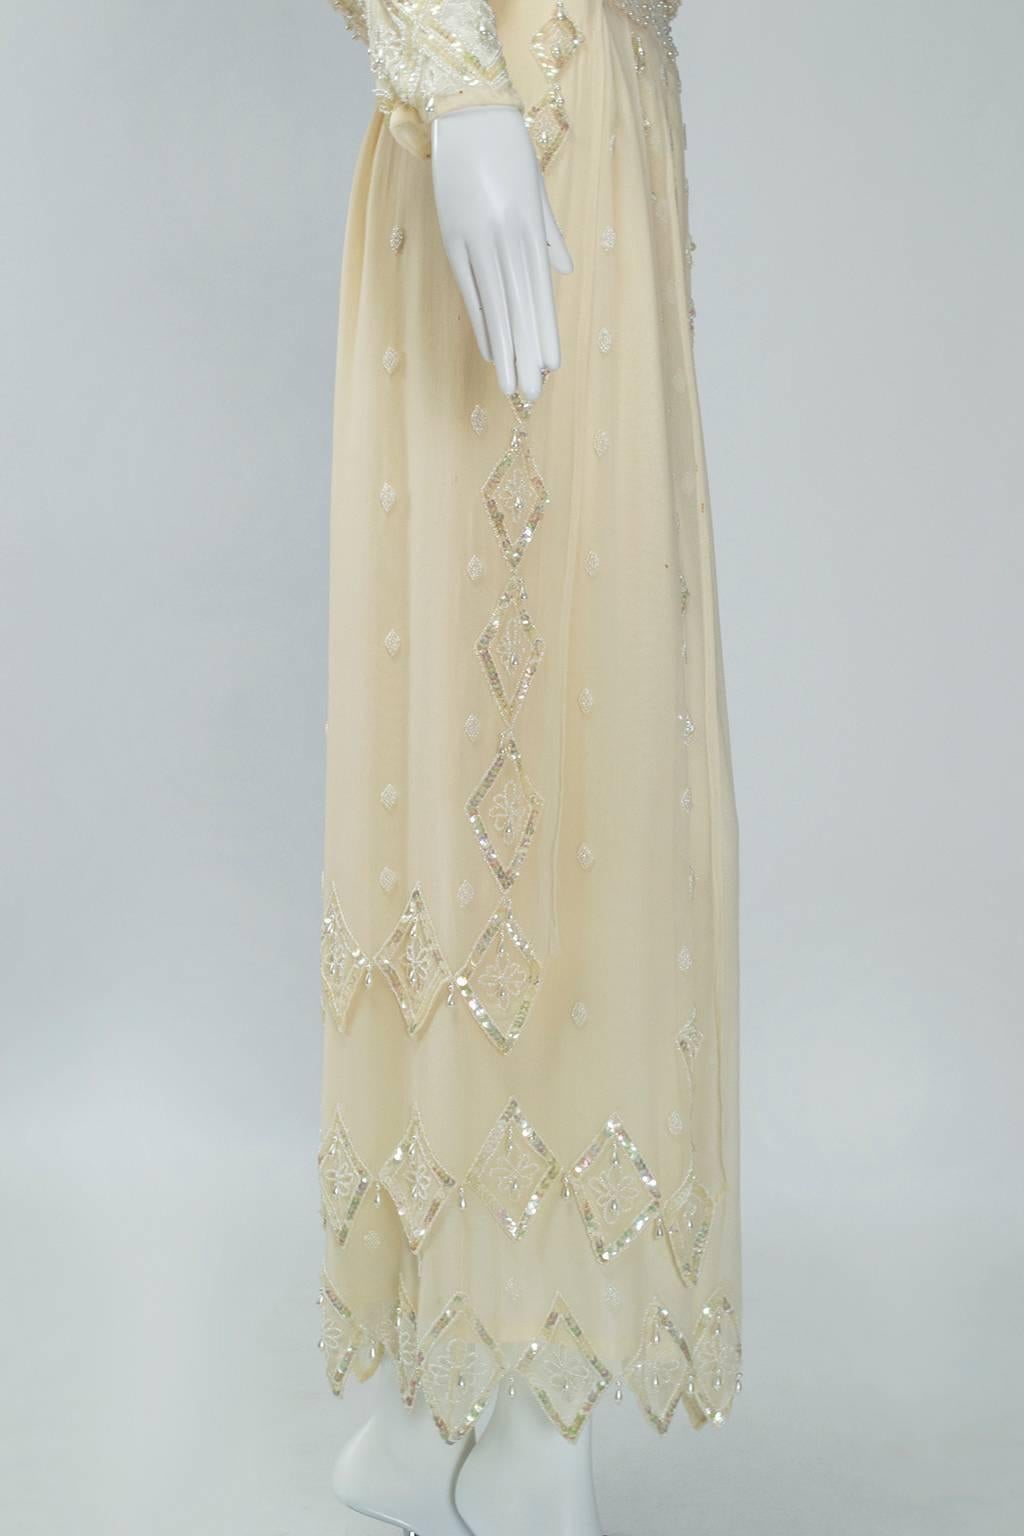 Ivory Edwardian Reproduction Ornamented Silk Tea or Bridal Gown - Small, 1980s 2